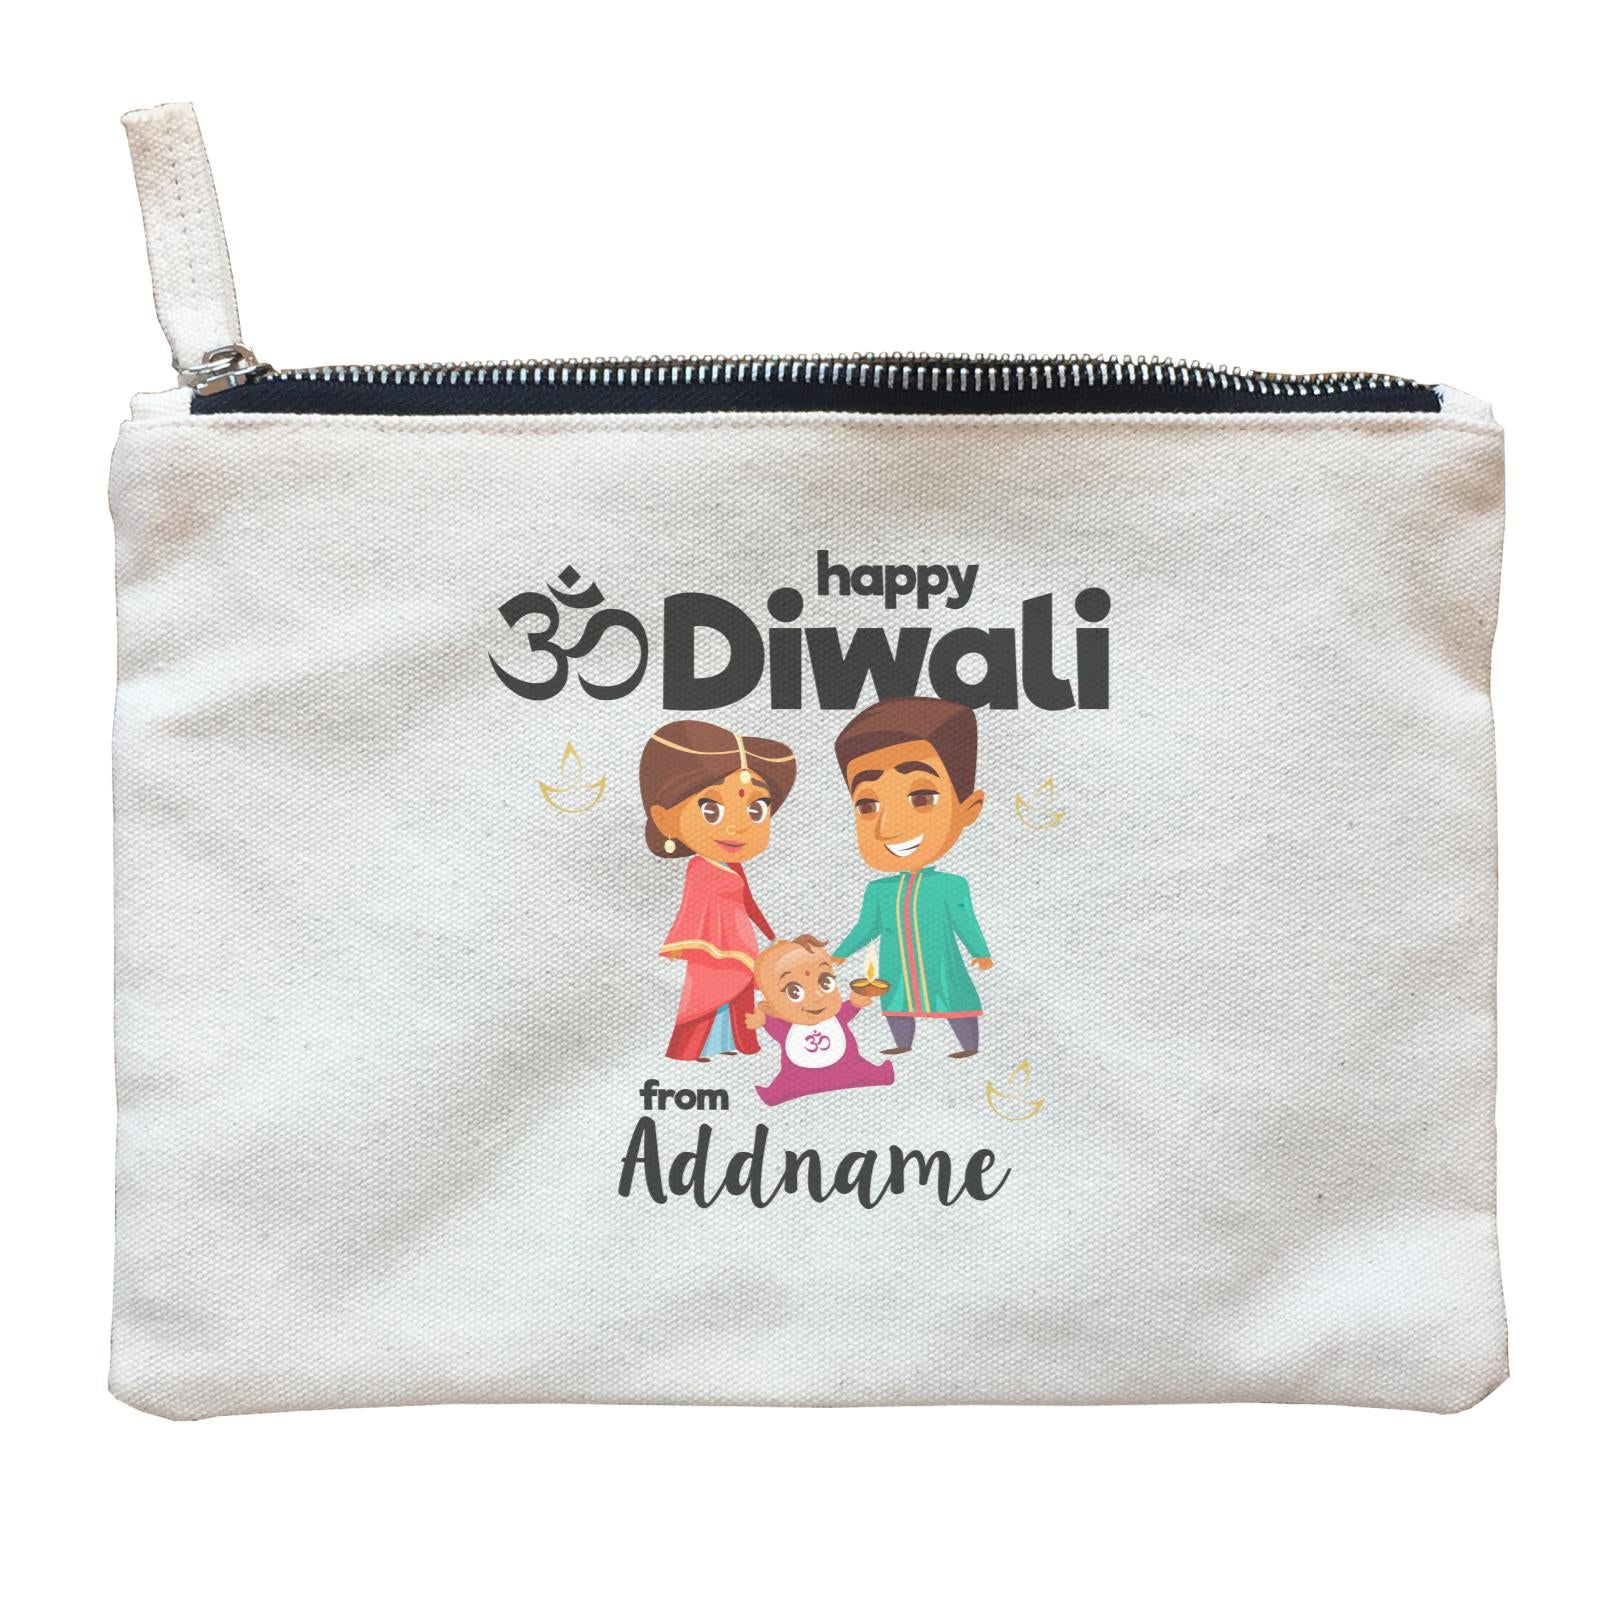 Cute Family Of Three OM Happy Diwali From Addname Zipper Pouch